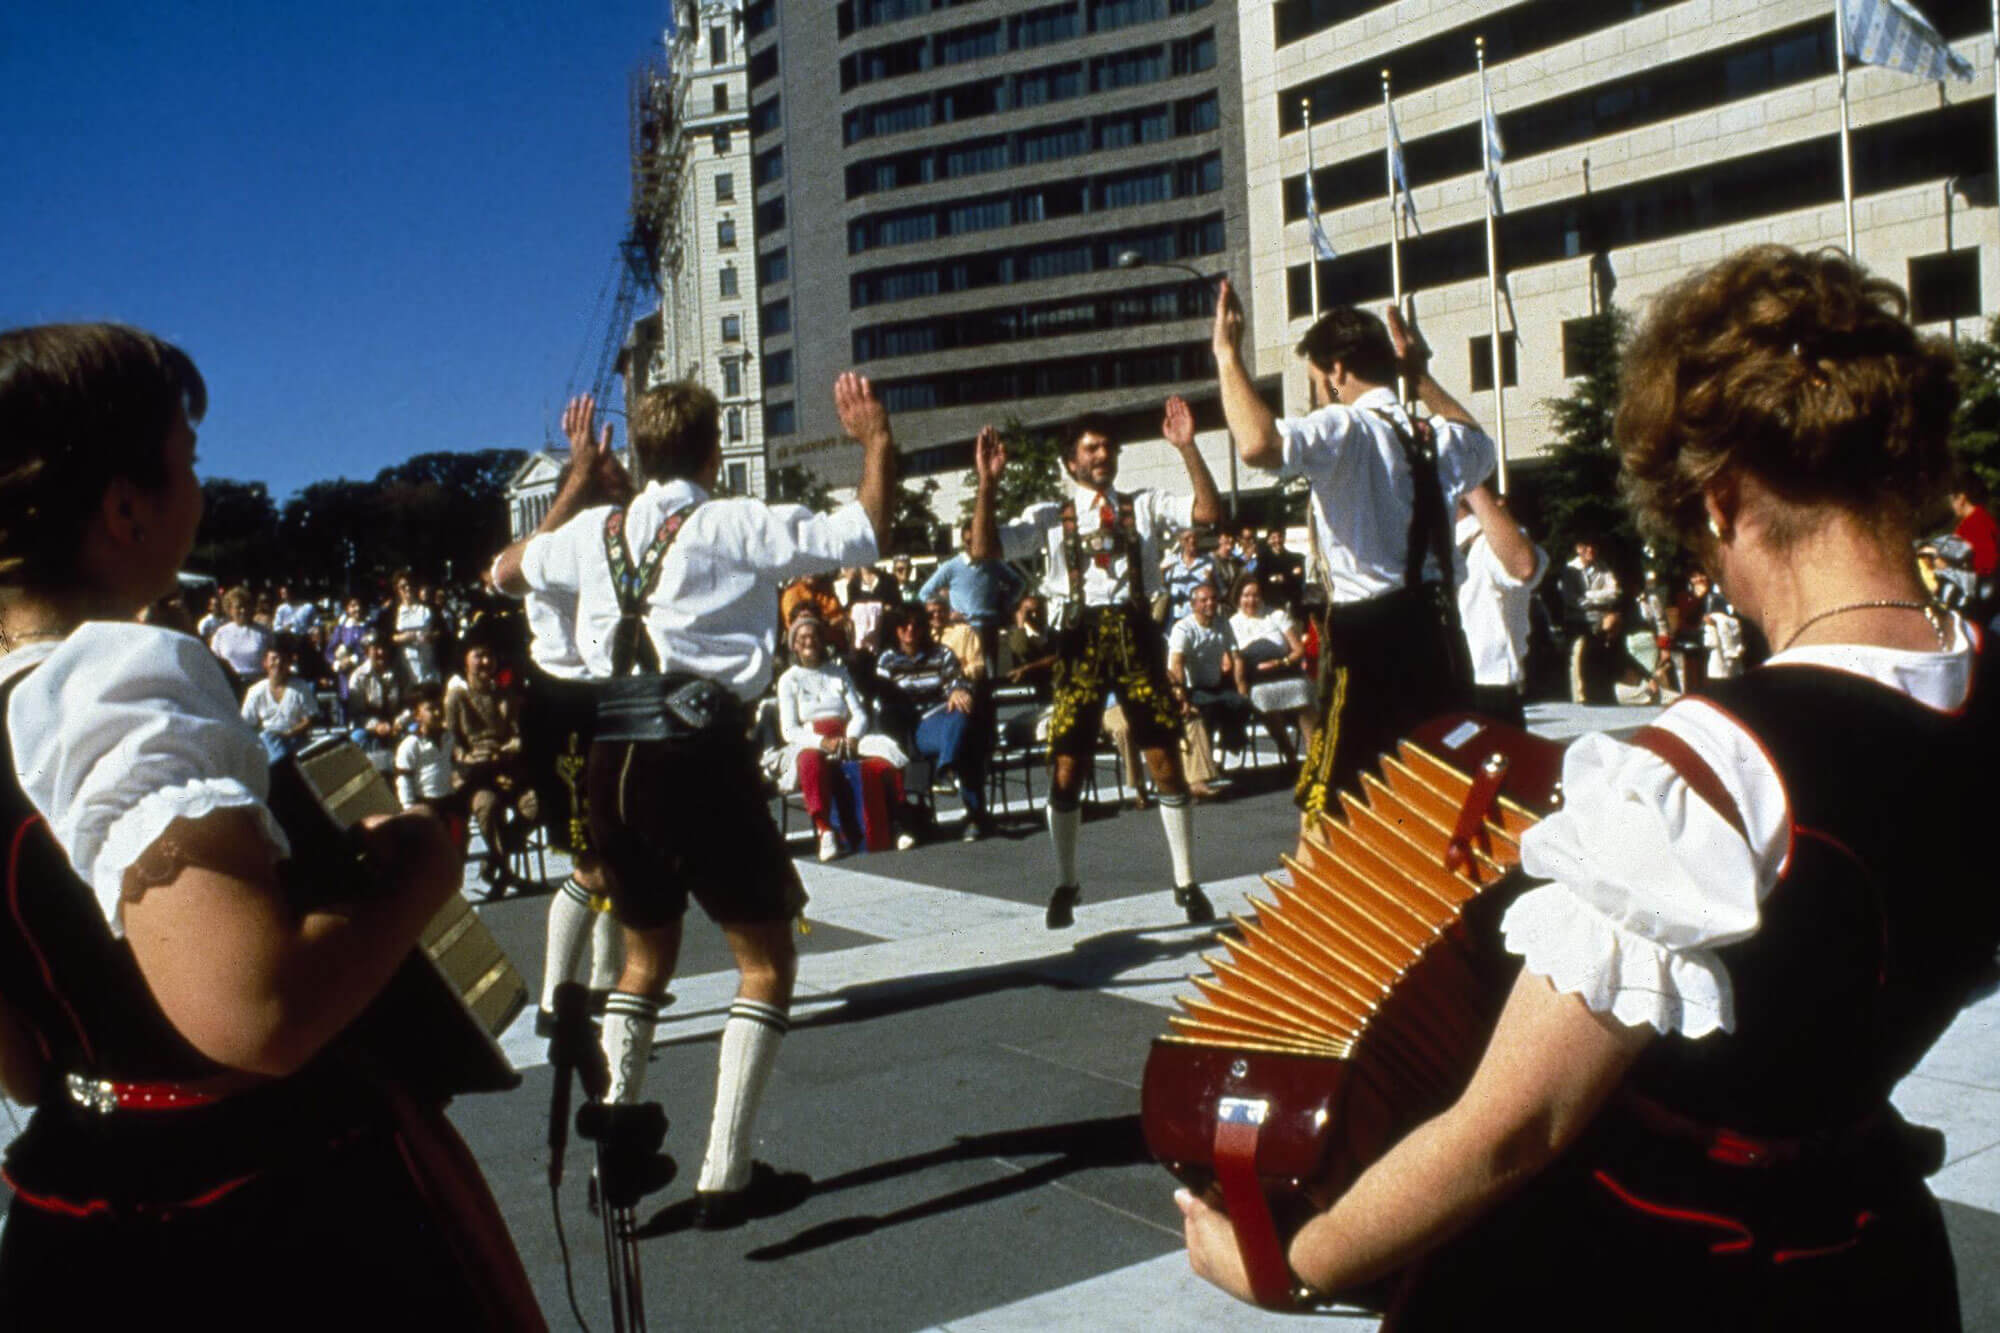 dancers and musicians celebrate during a festival in Washington, D.C.